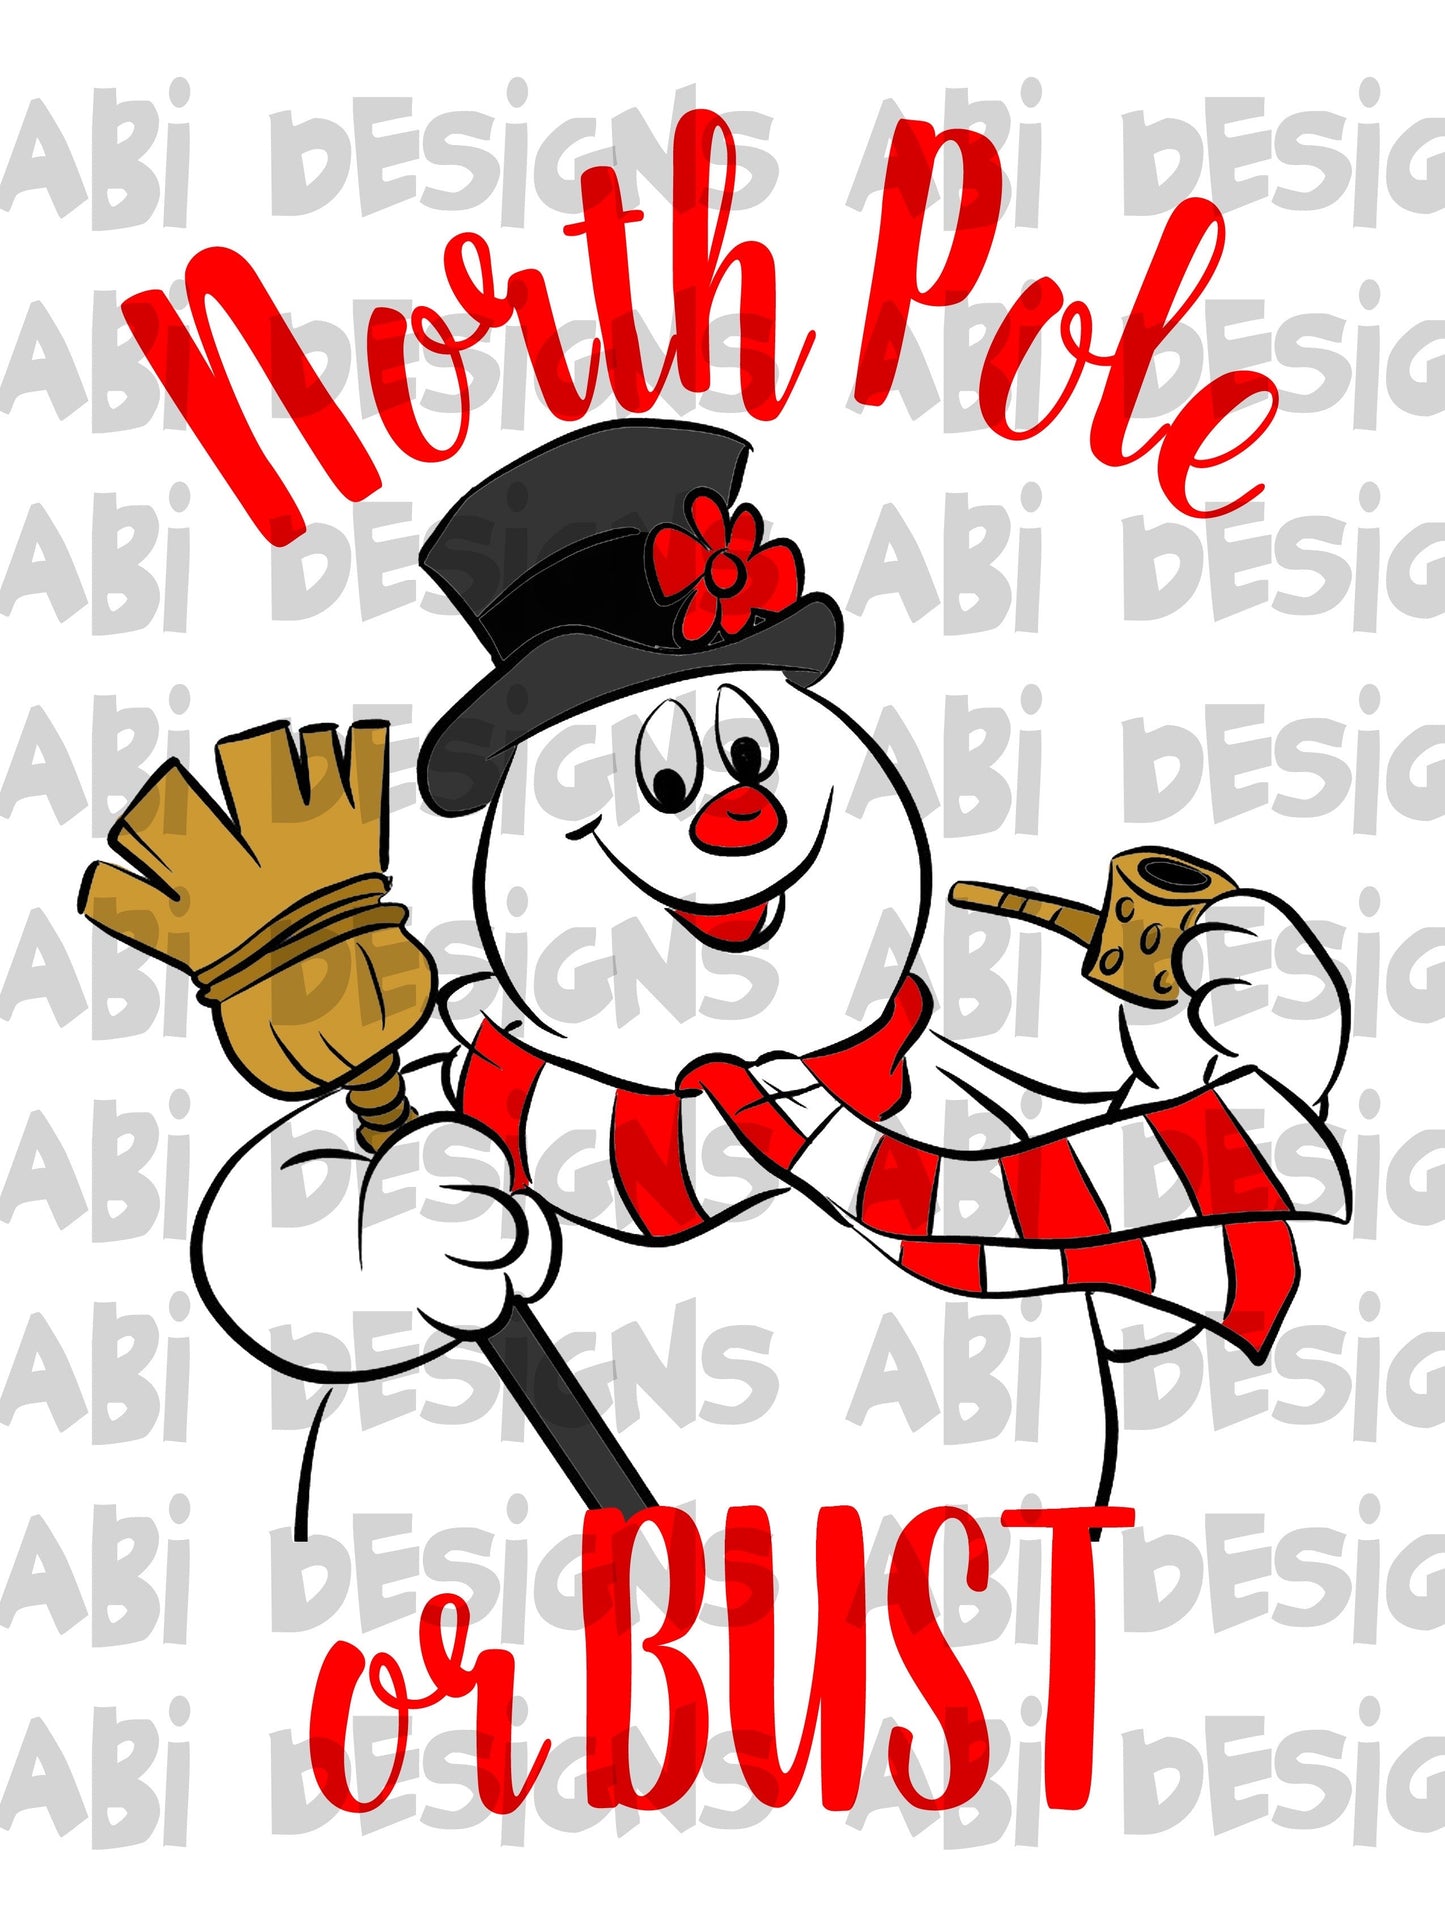 Frosty North Pole or bust-Sublimation